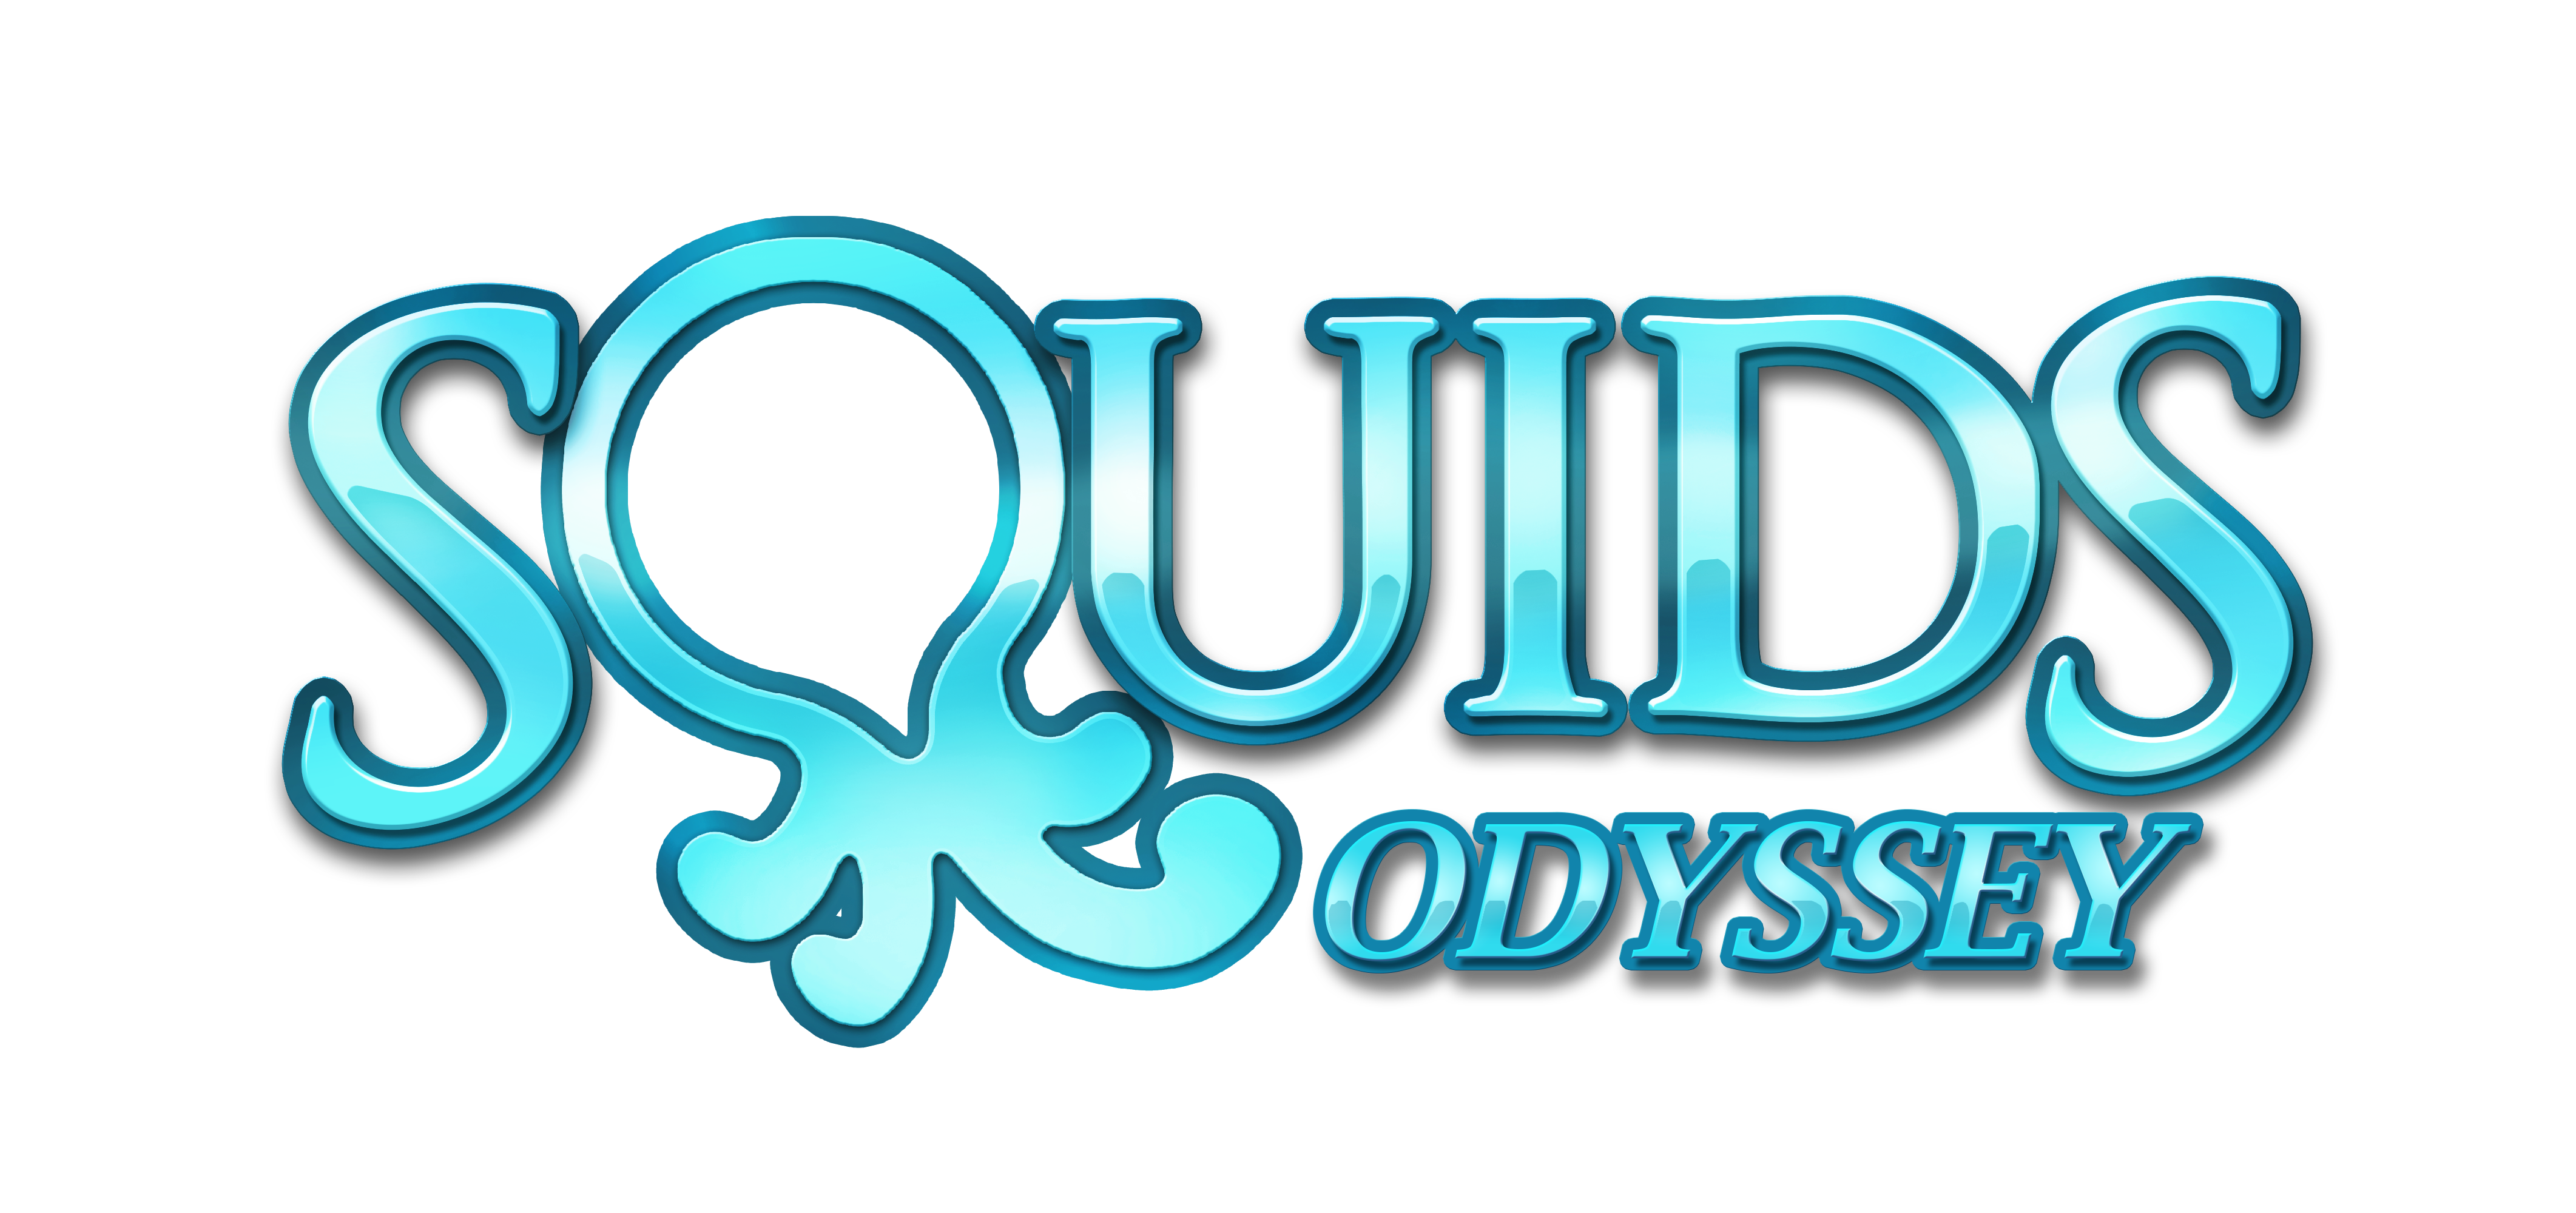 Squids Odyssey Review: I’d Like To Be Under The Sea